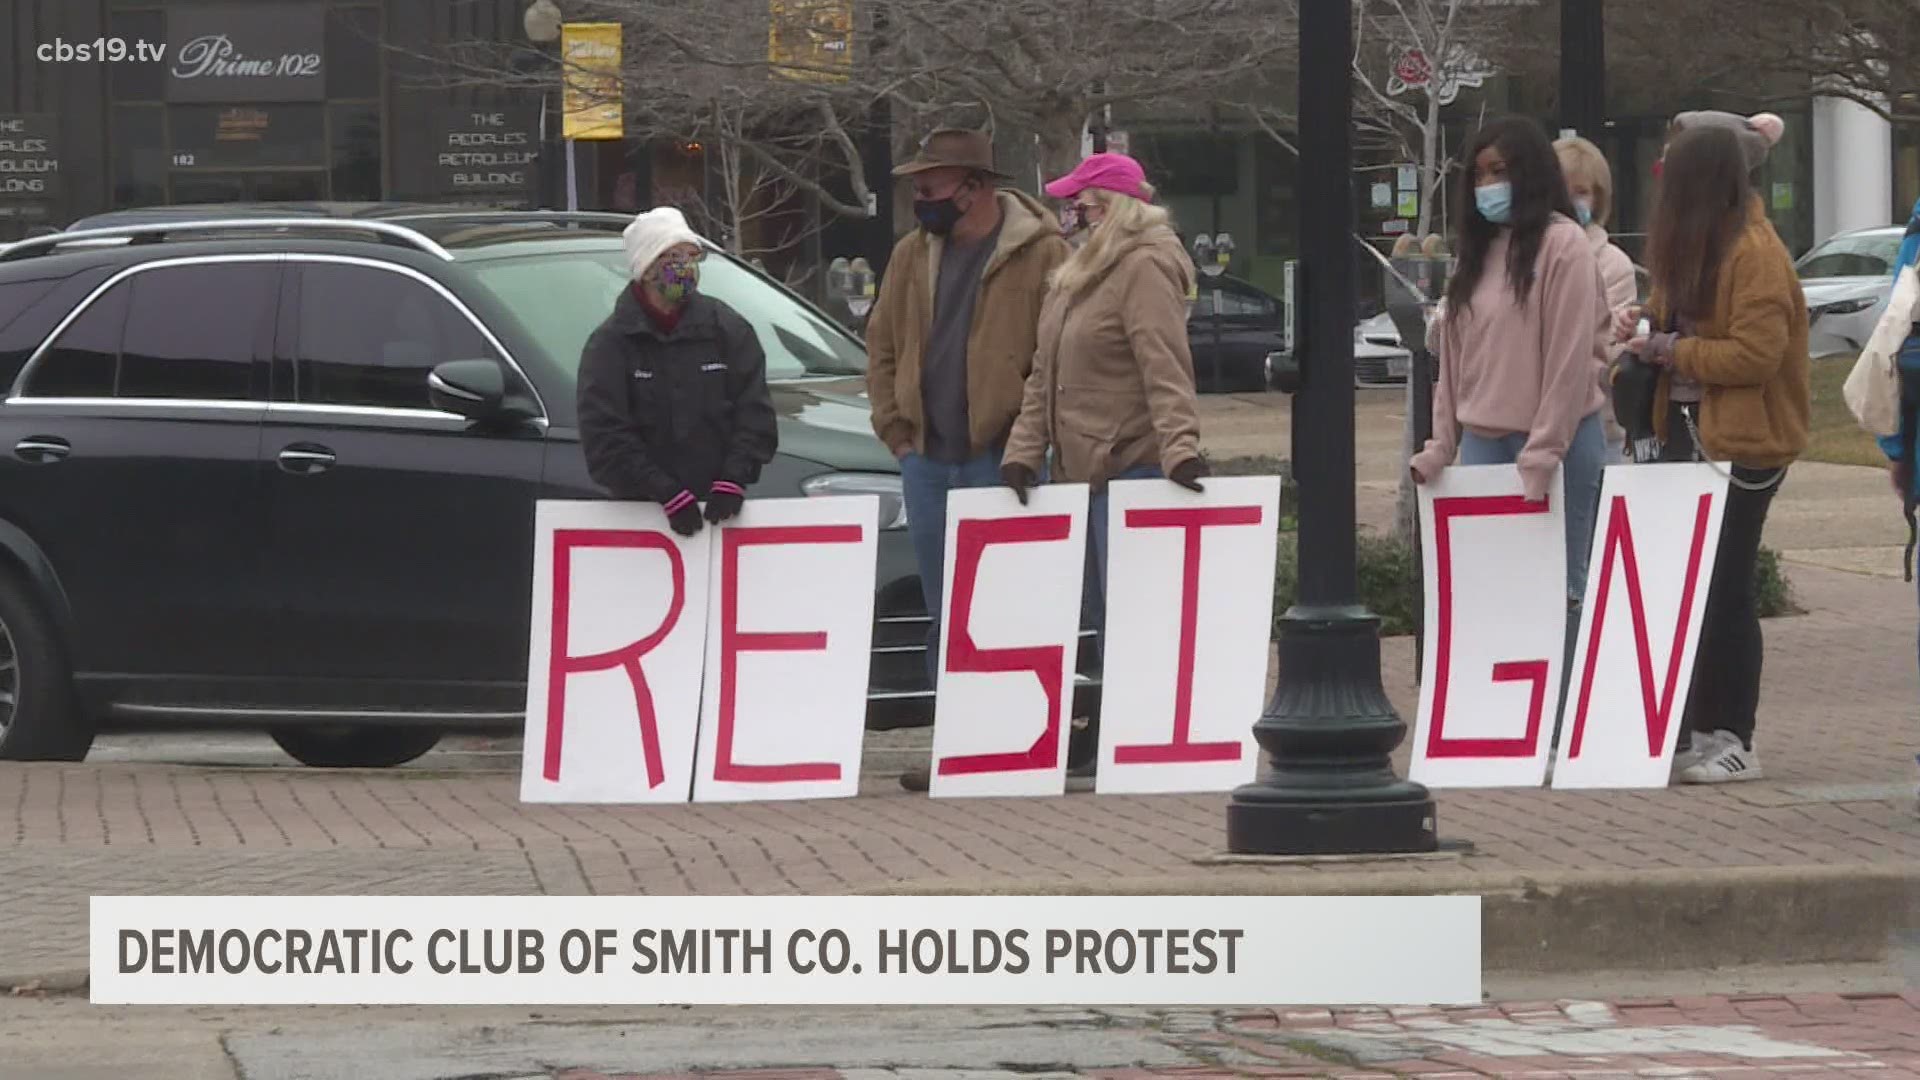 On Thursday, the Democratic Club of East Texas plans to protest again outside of Rep. Gohmert's office in Tyler.